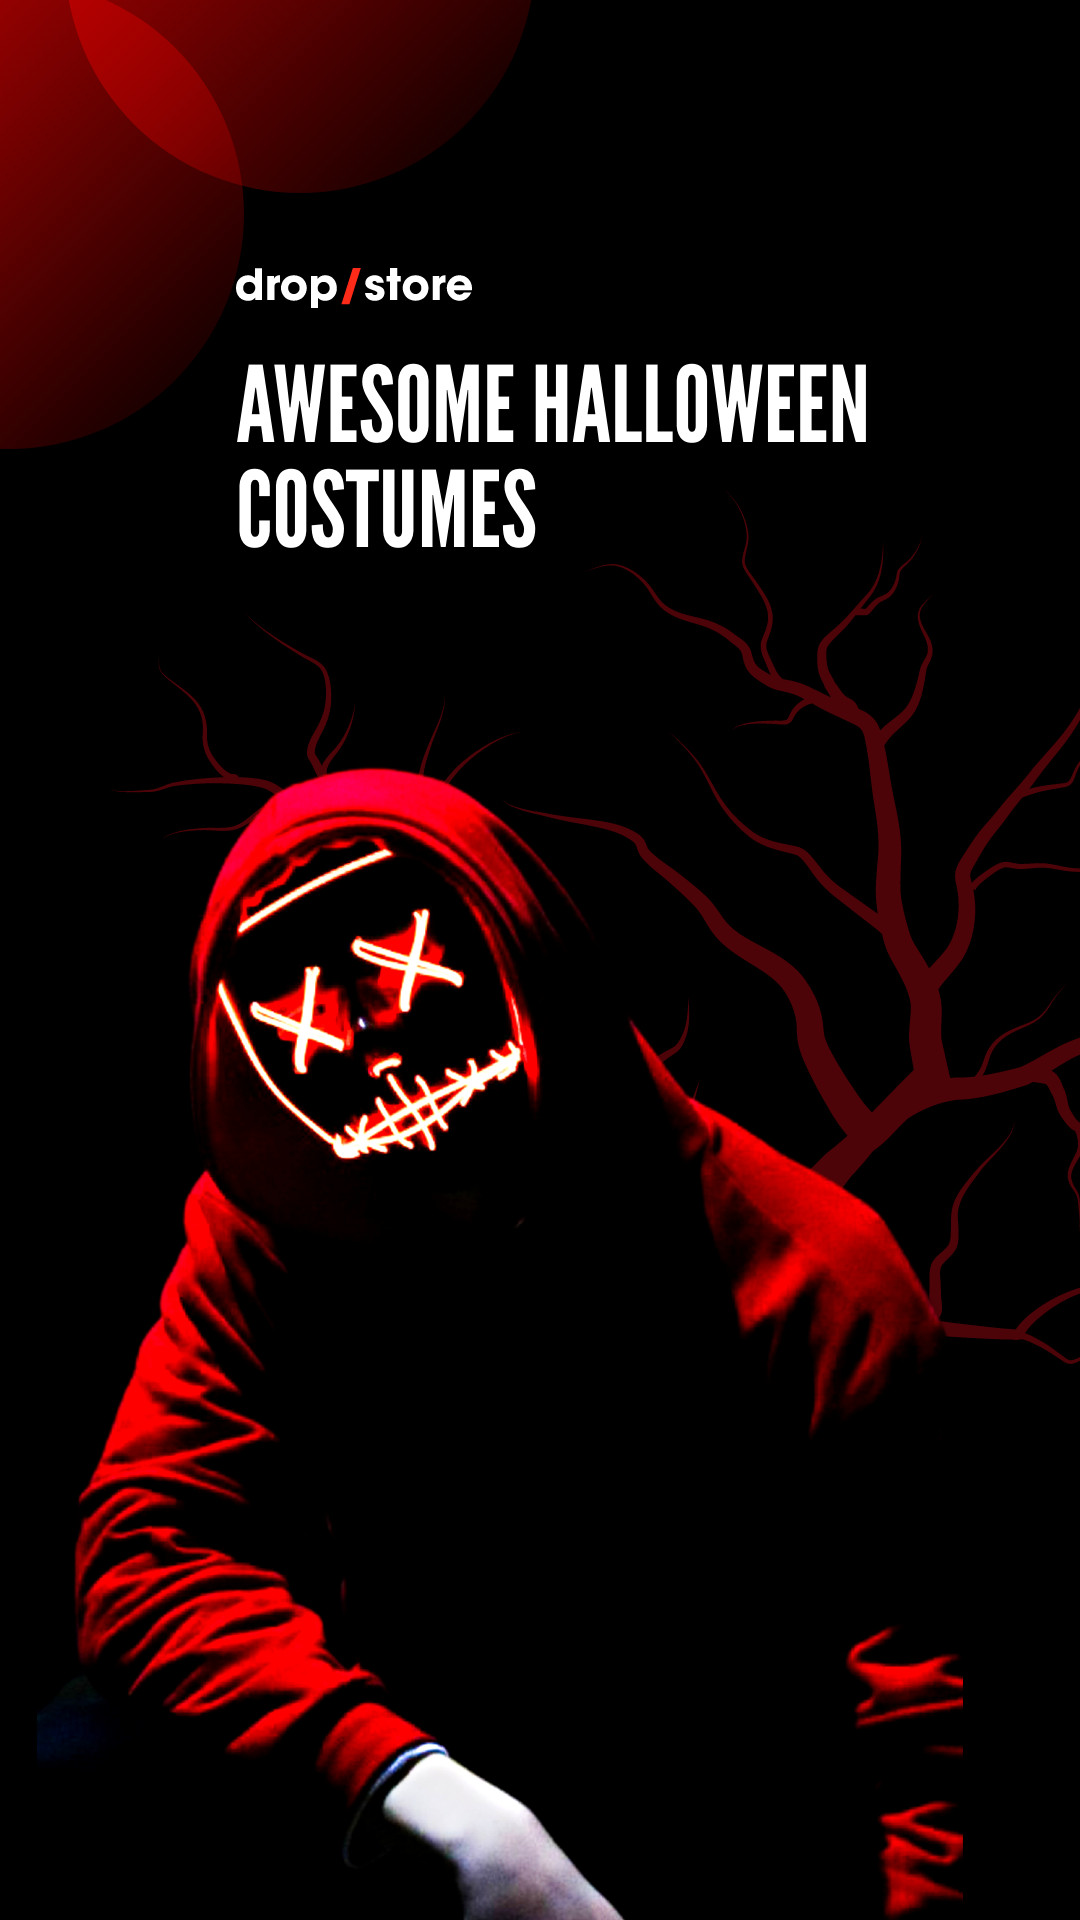 Black Red Halloween Costumes Facebook Cover 820x360